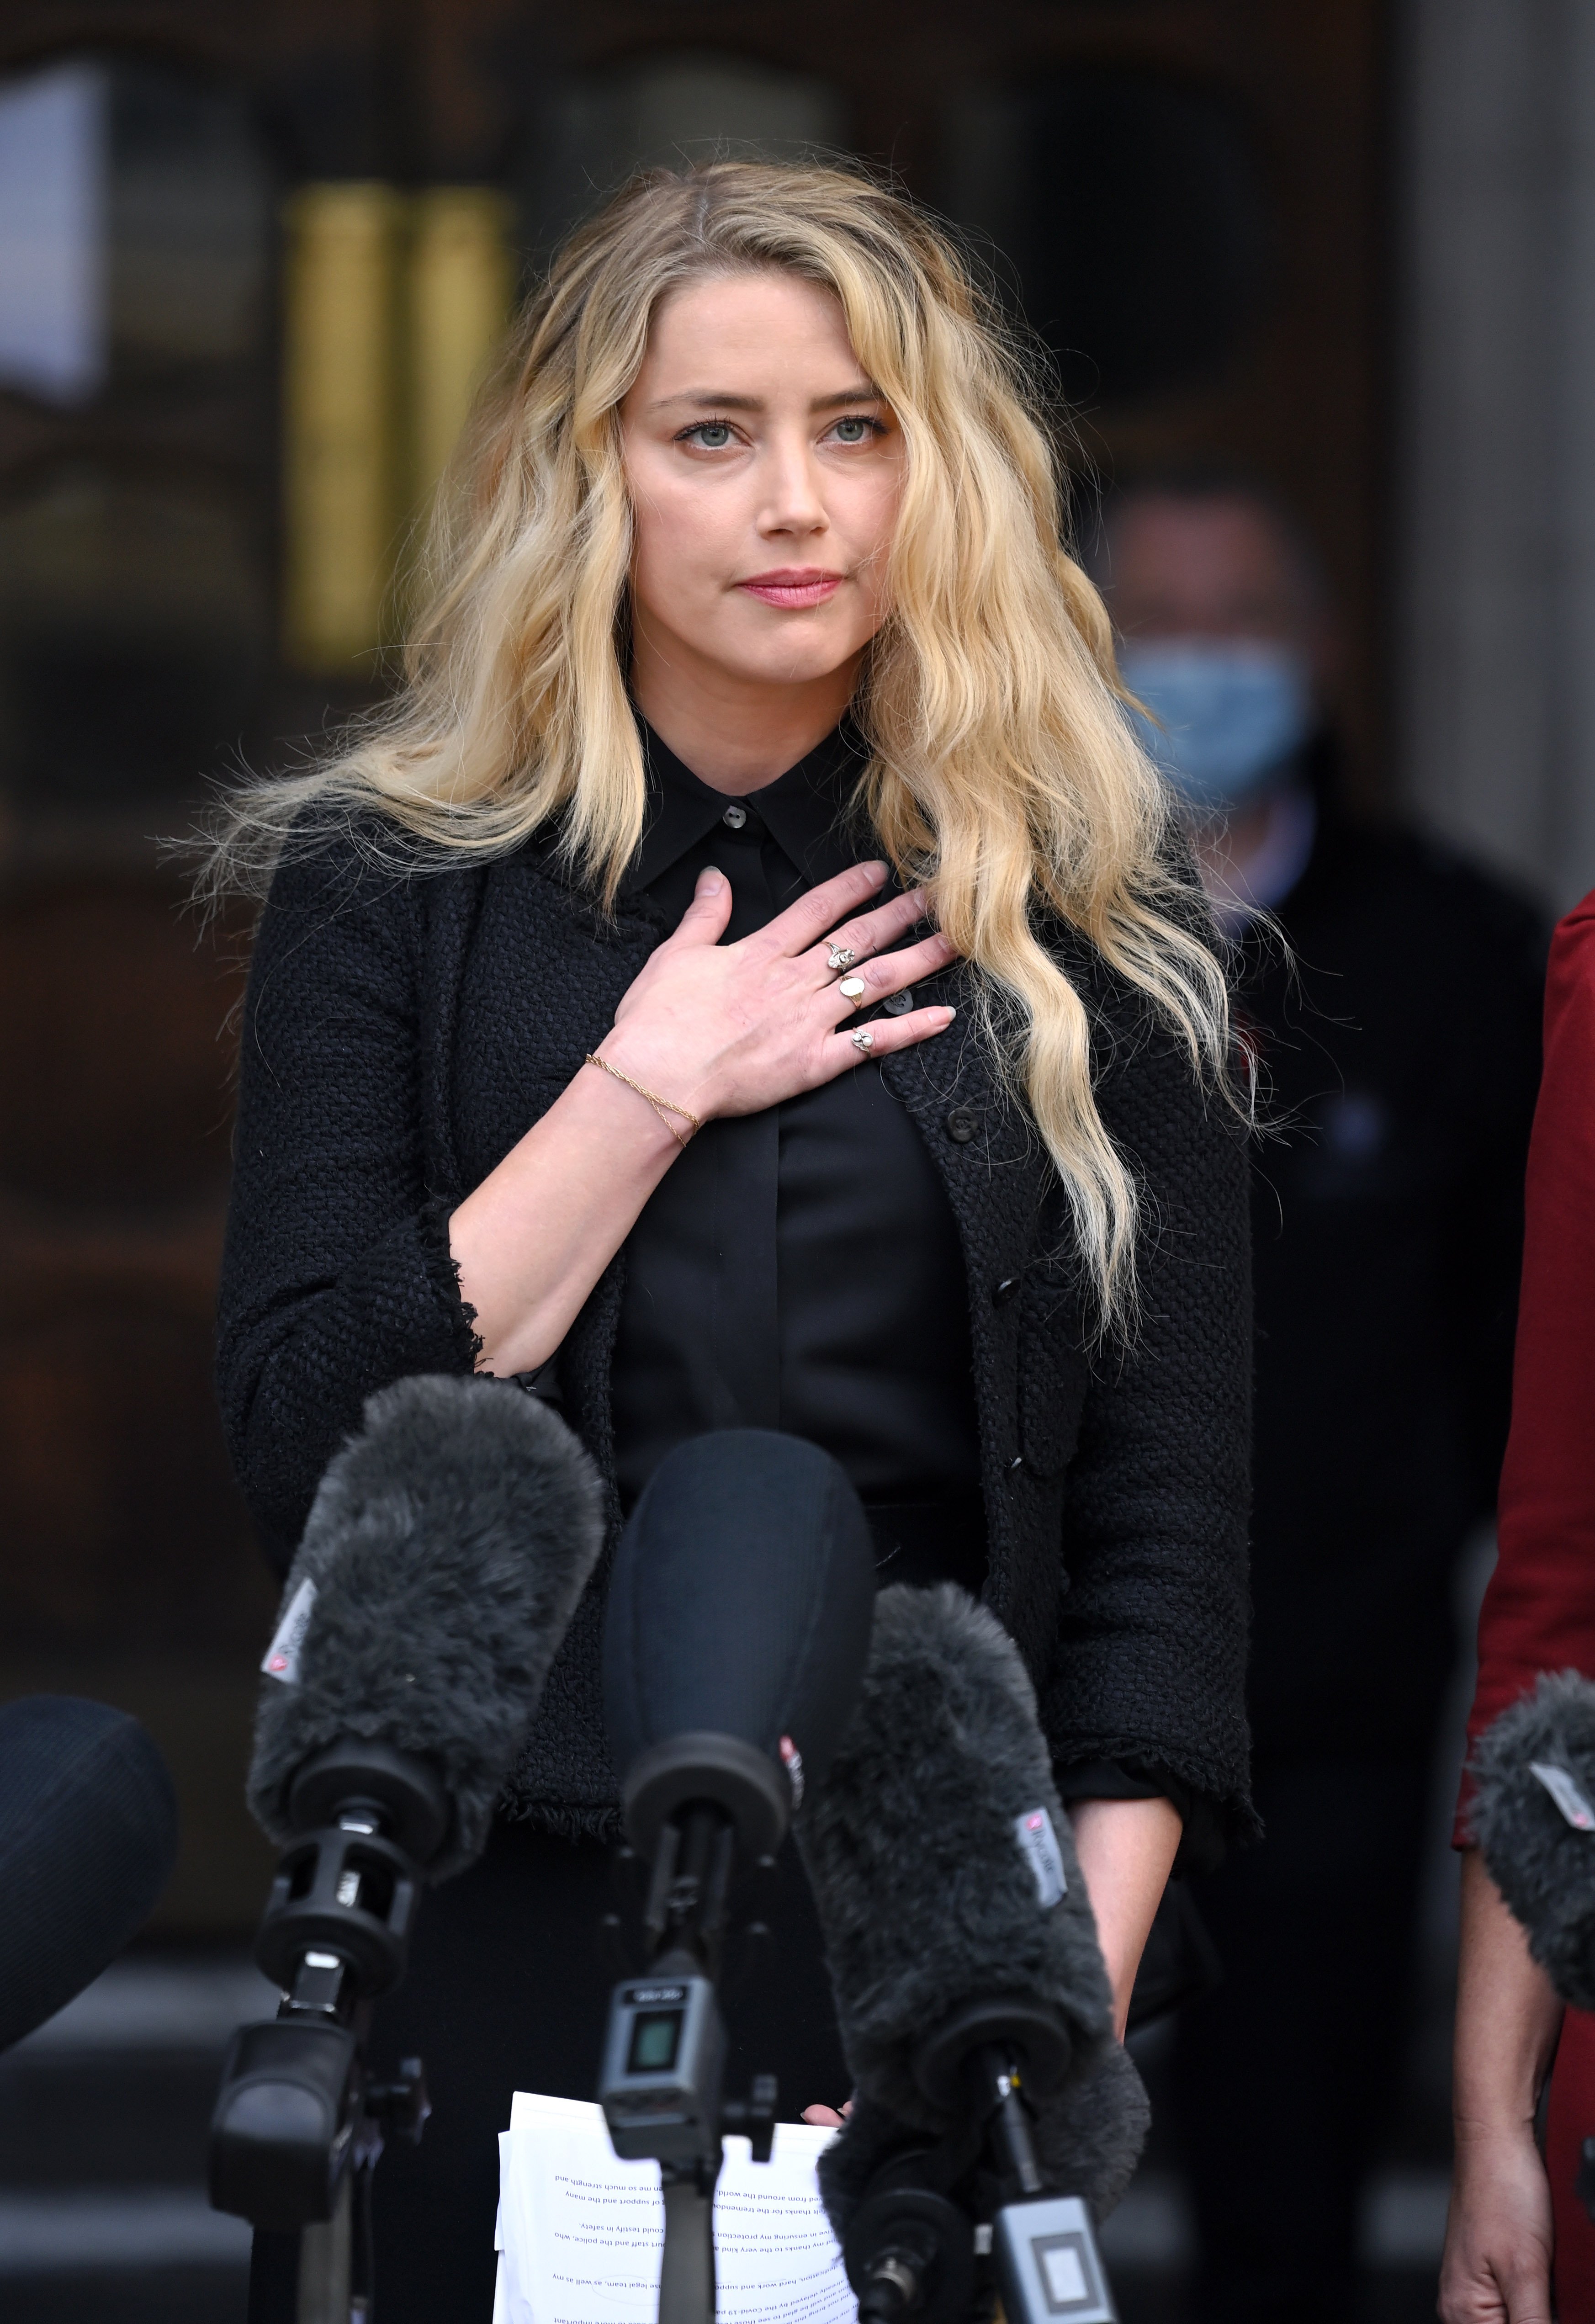 Amber Heard giving a statement at the Royal Courts of Justice in London | Source: Getty Images